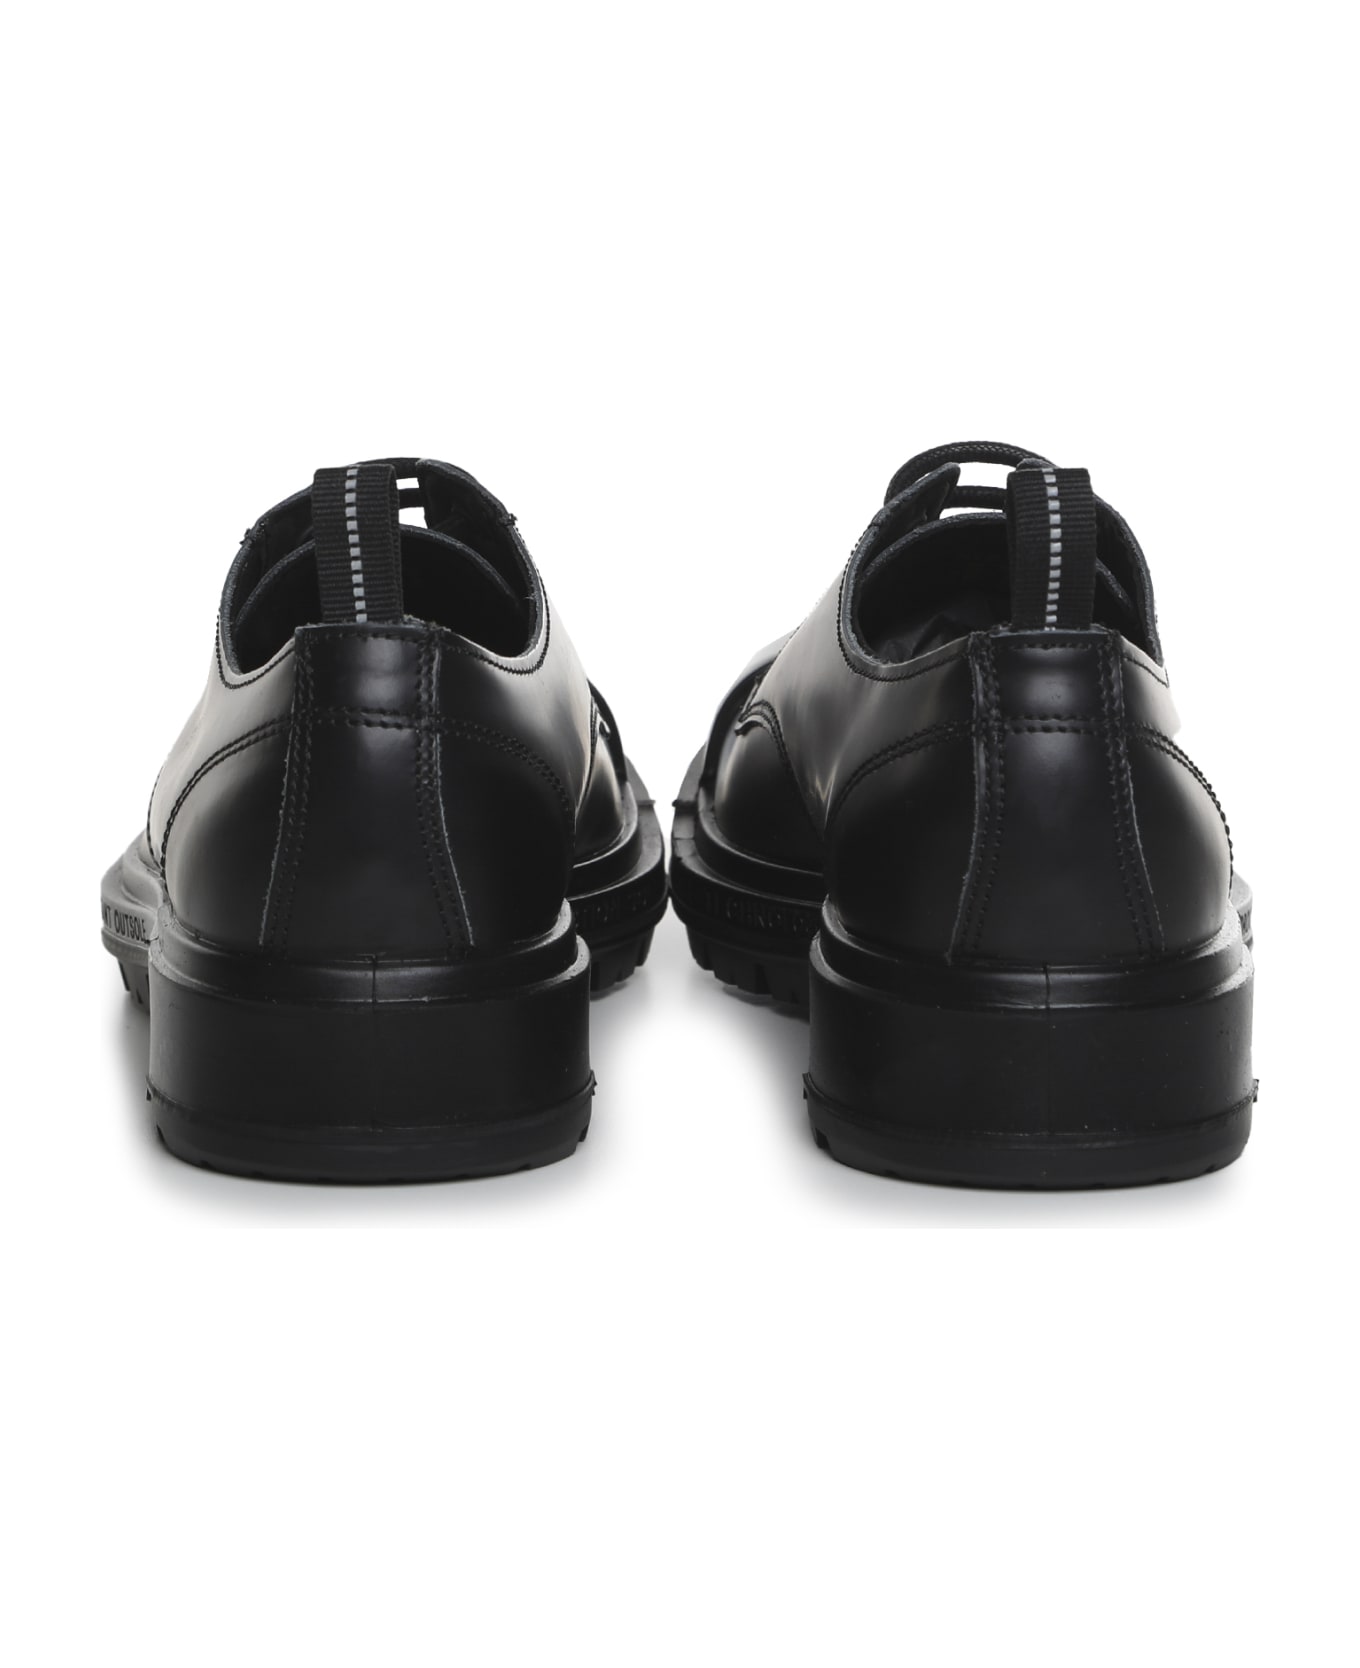 Pezzol 1951 Smooth Leather Derby Shoes - Black